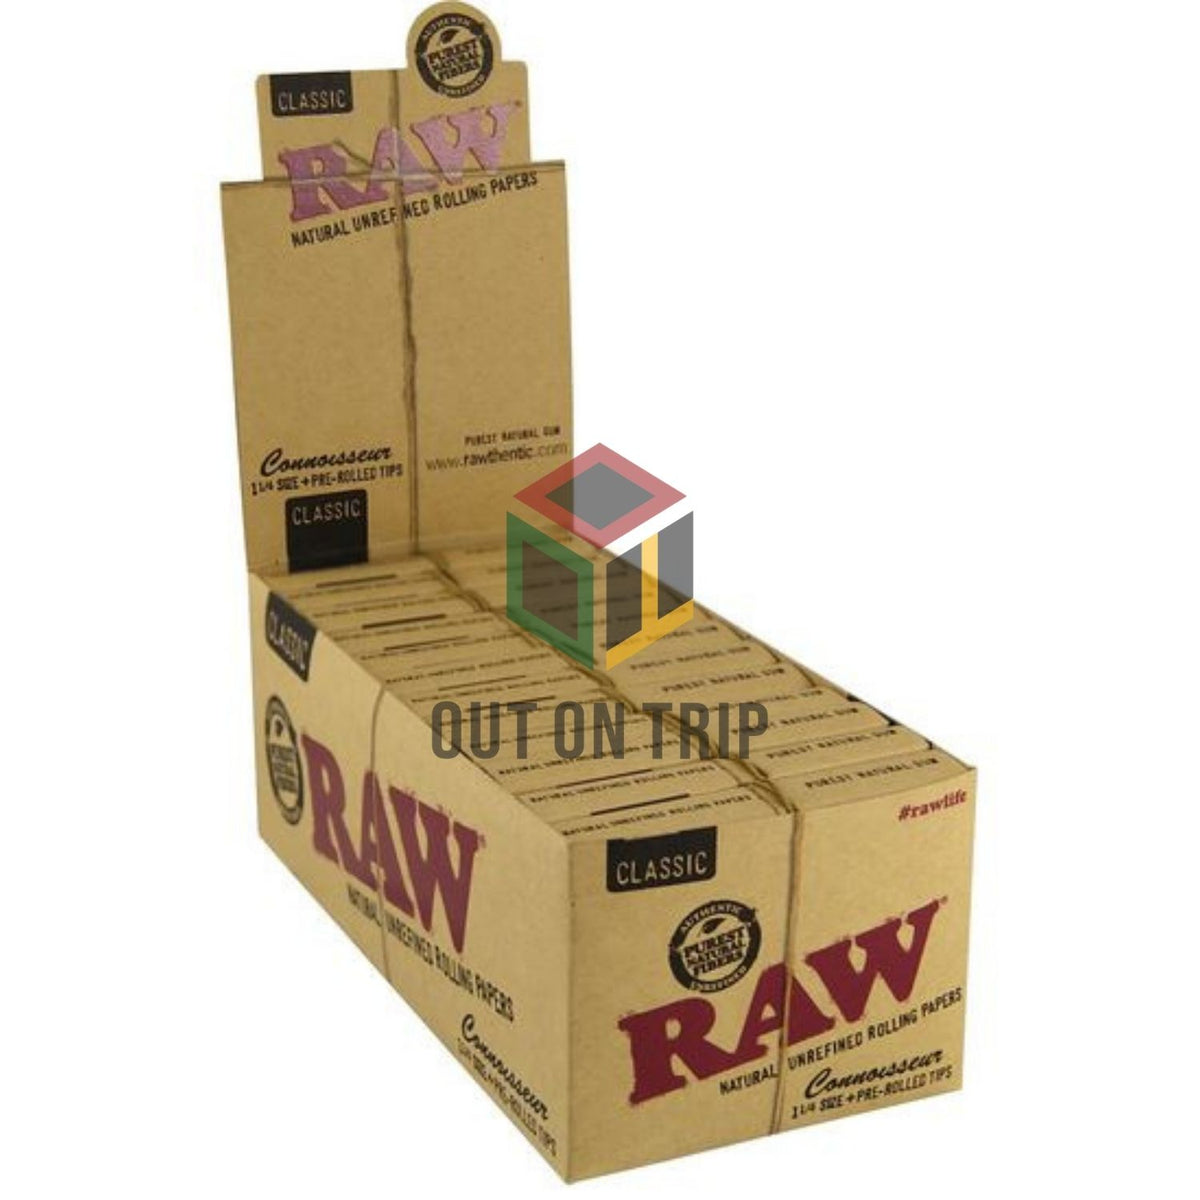 RAW Classic Connoisseur - 1 1/4 Rolling Papers with Pre-Rolled Tips